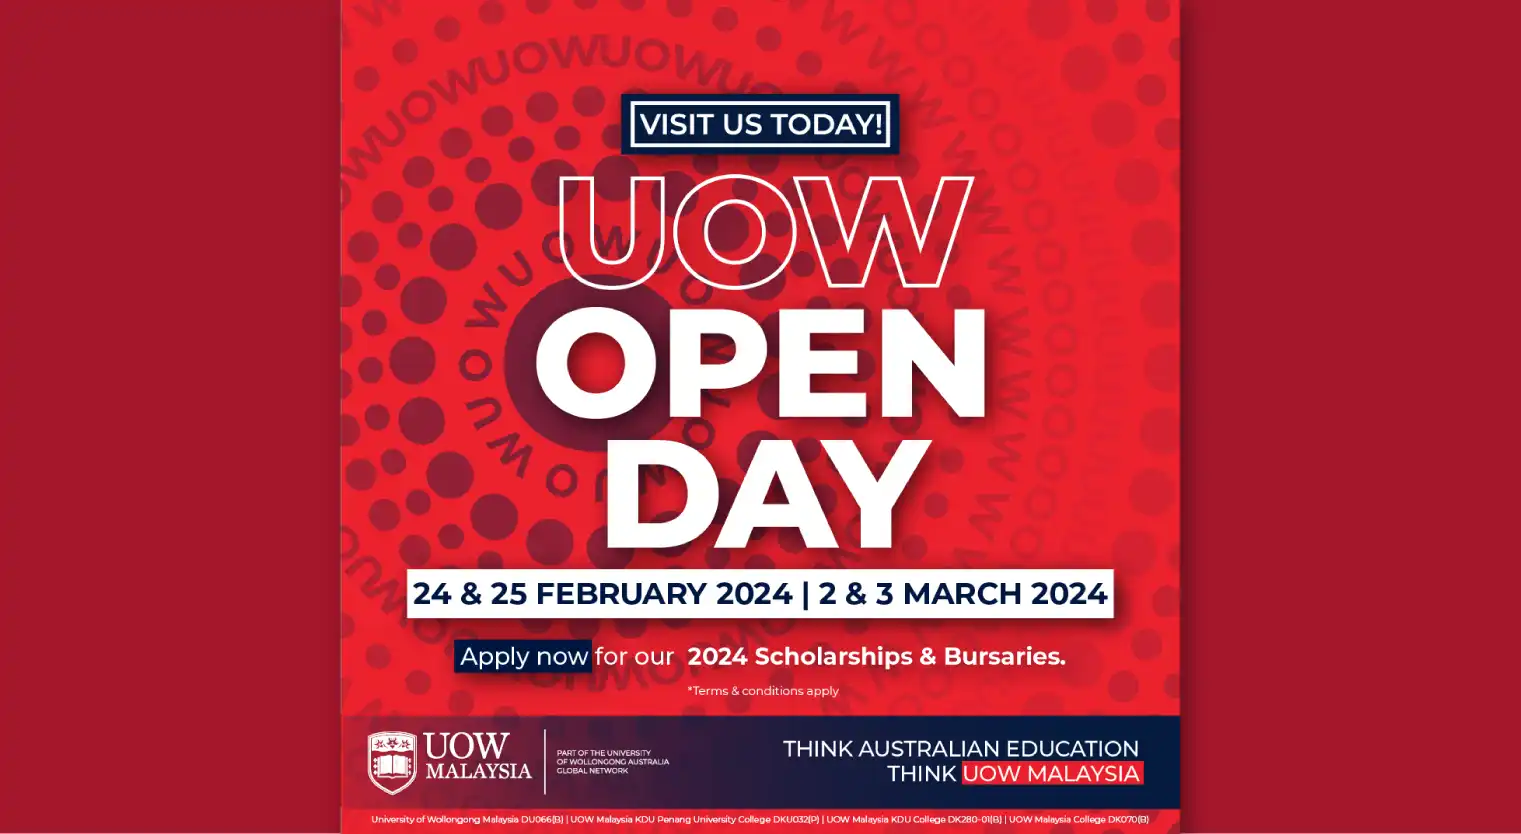 Discover Top Australian Education at UOW Malaysia (23 March 2024)